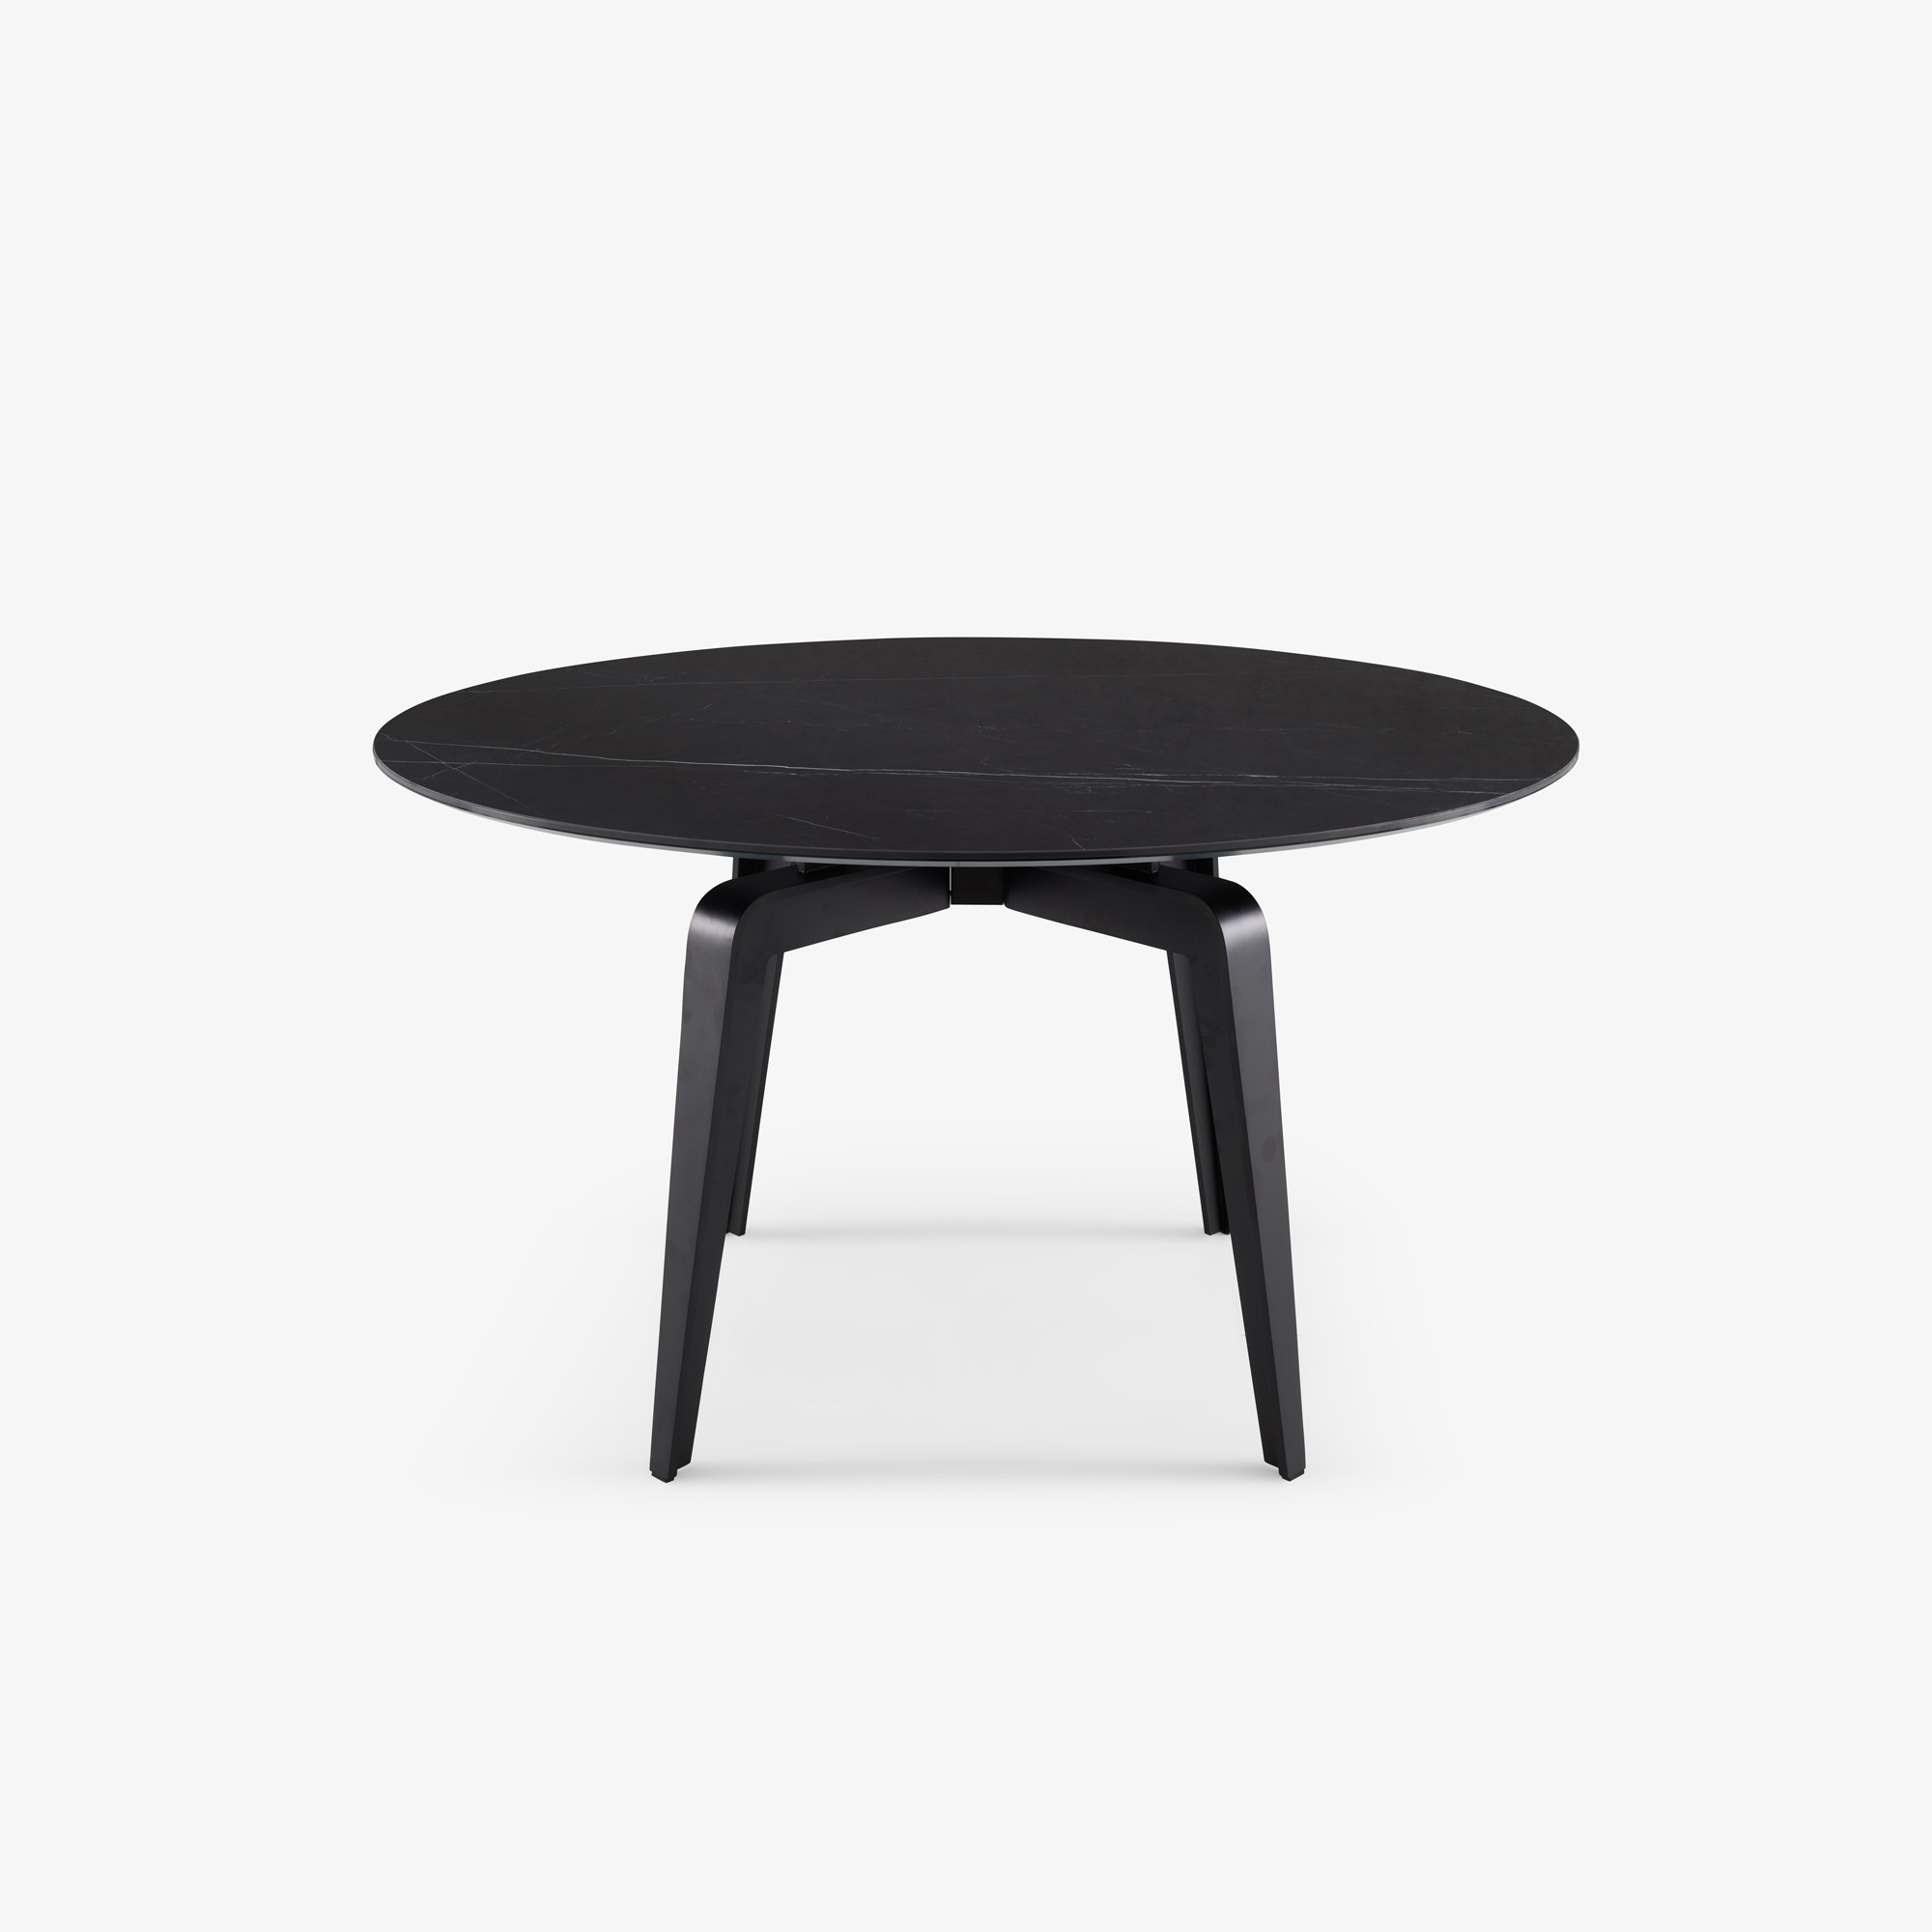 Image Round dining table black lacquered base  1